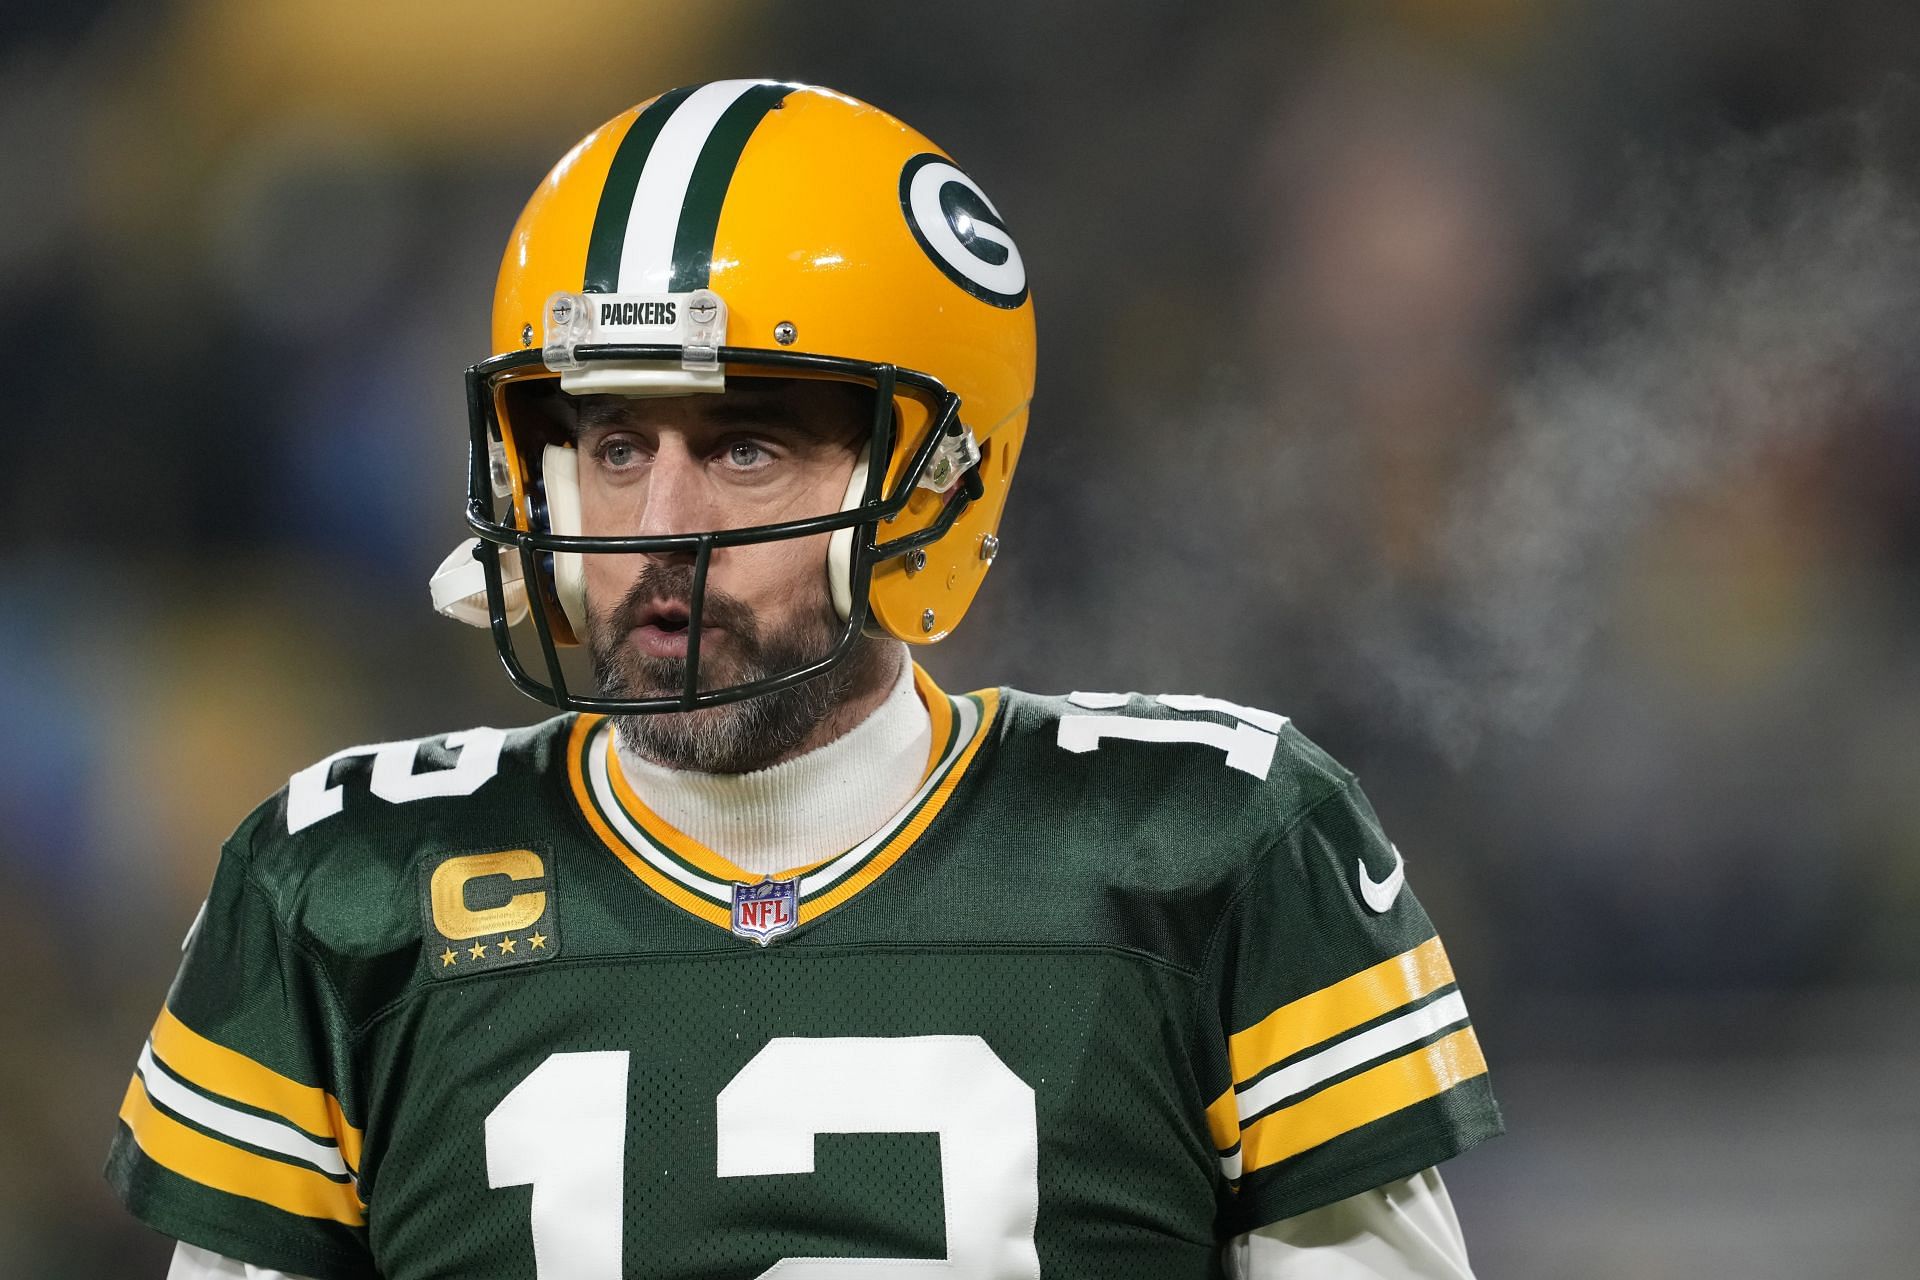 Aaron Rodgers will no longer be wearing the Packers jersey